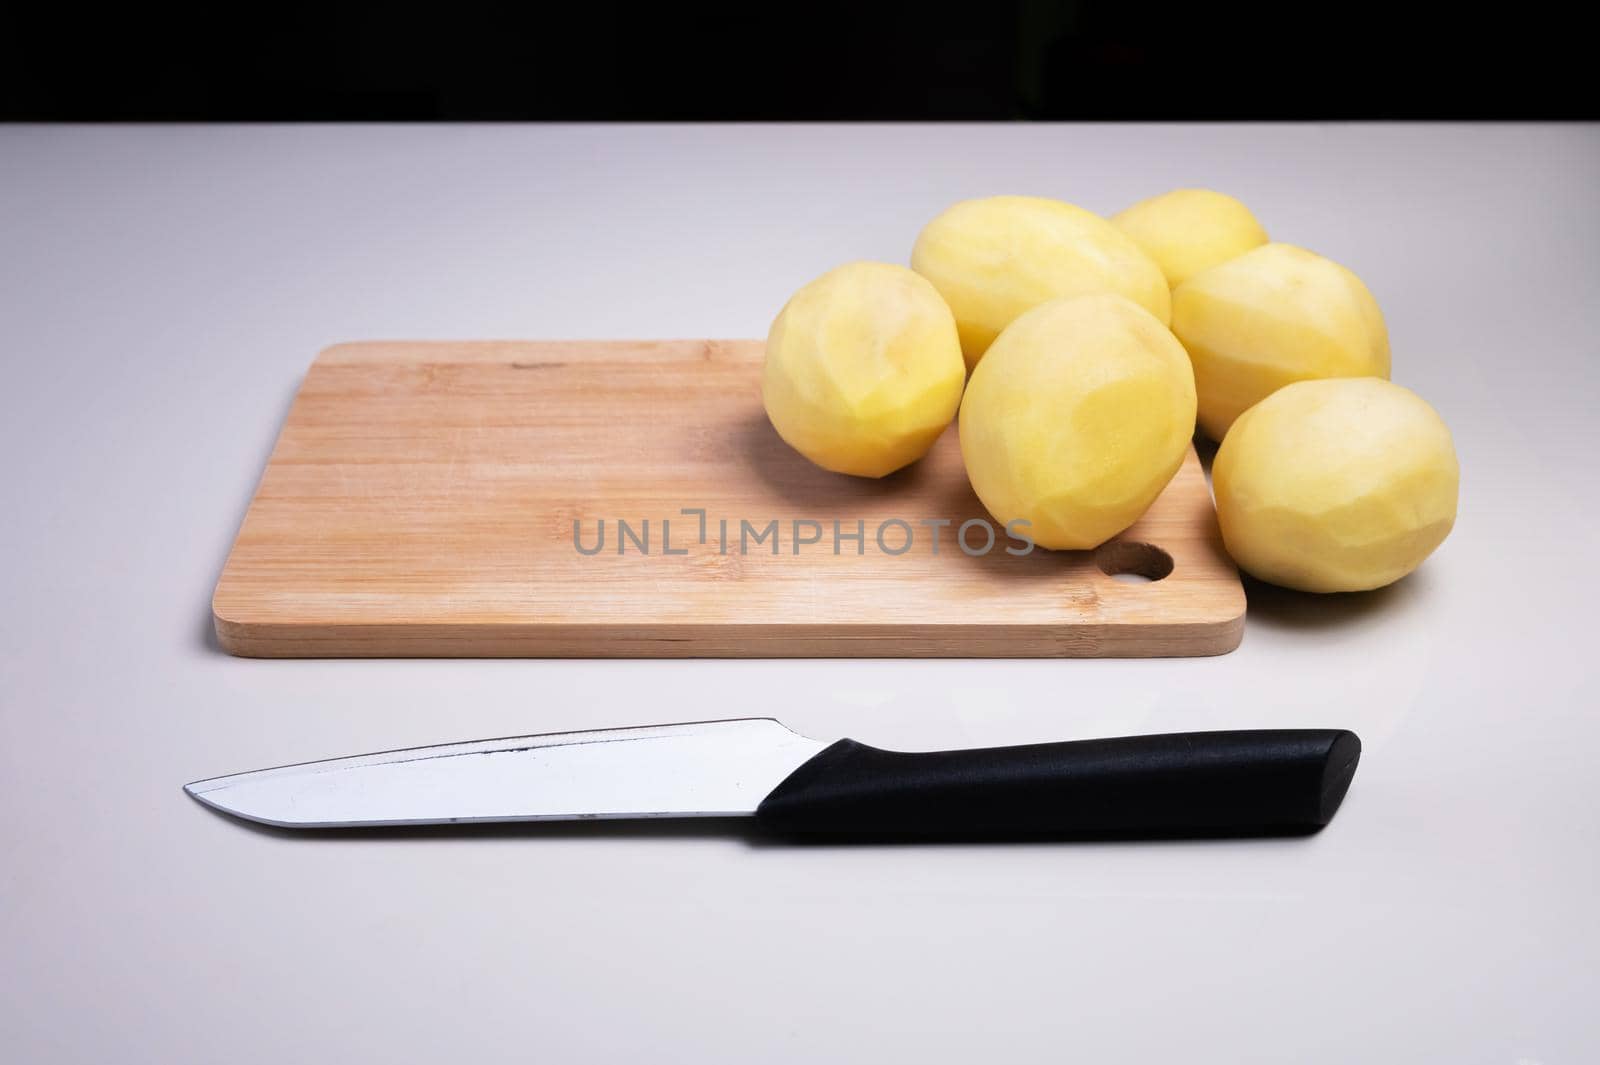 Peeled potatoes on a wooden cutting board next to a kitchen knife. Home cooking vegetables. Healthy food by yanik88